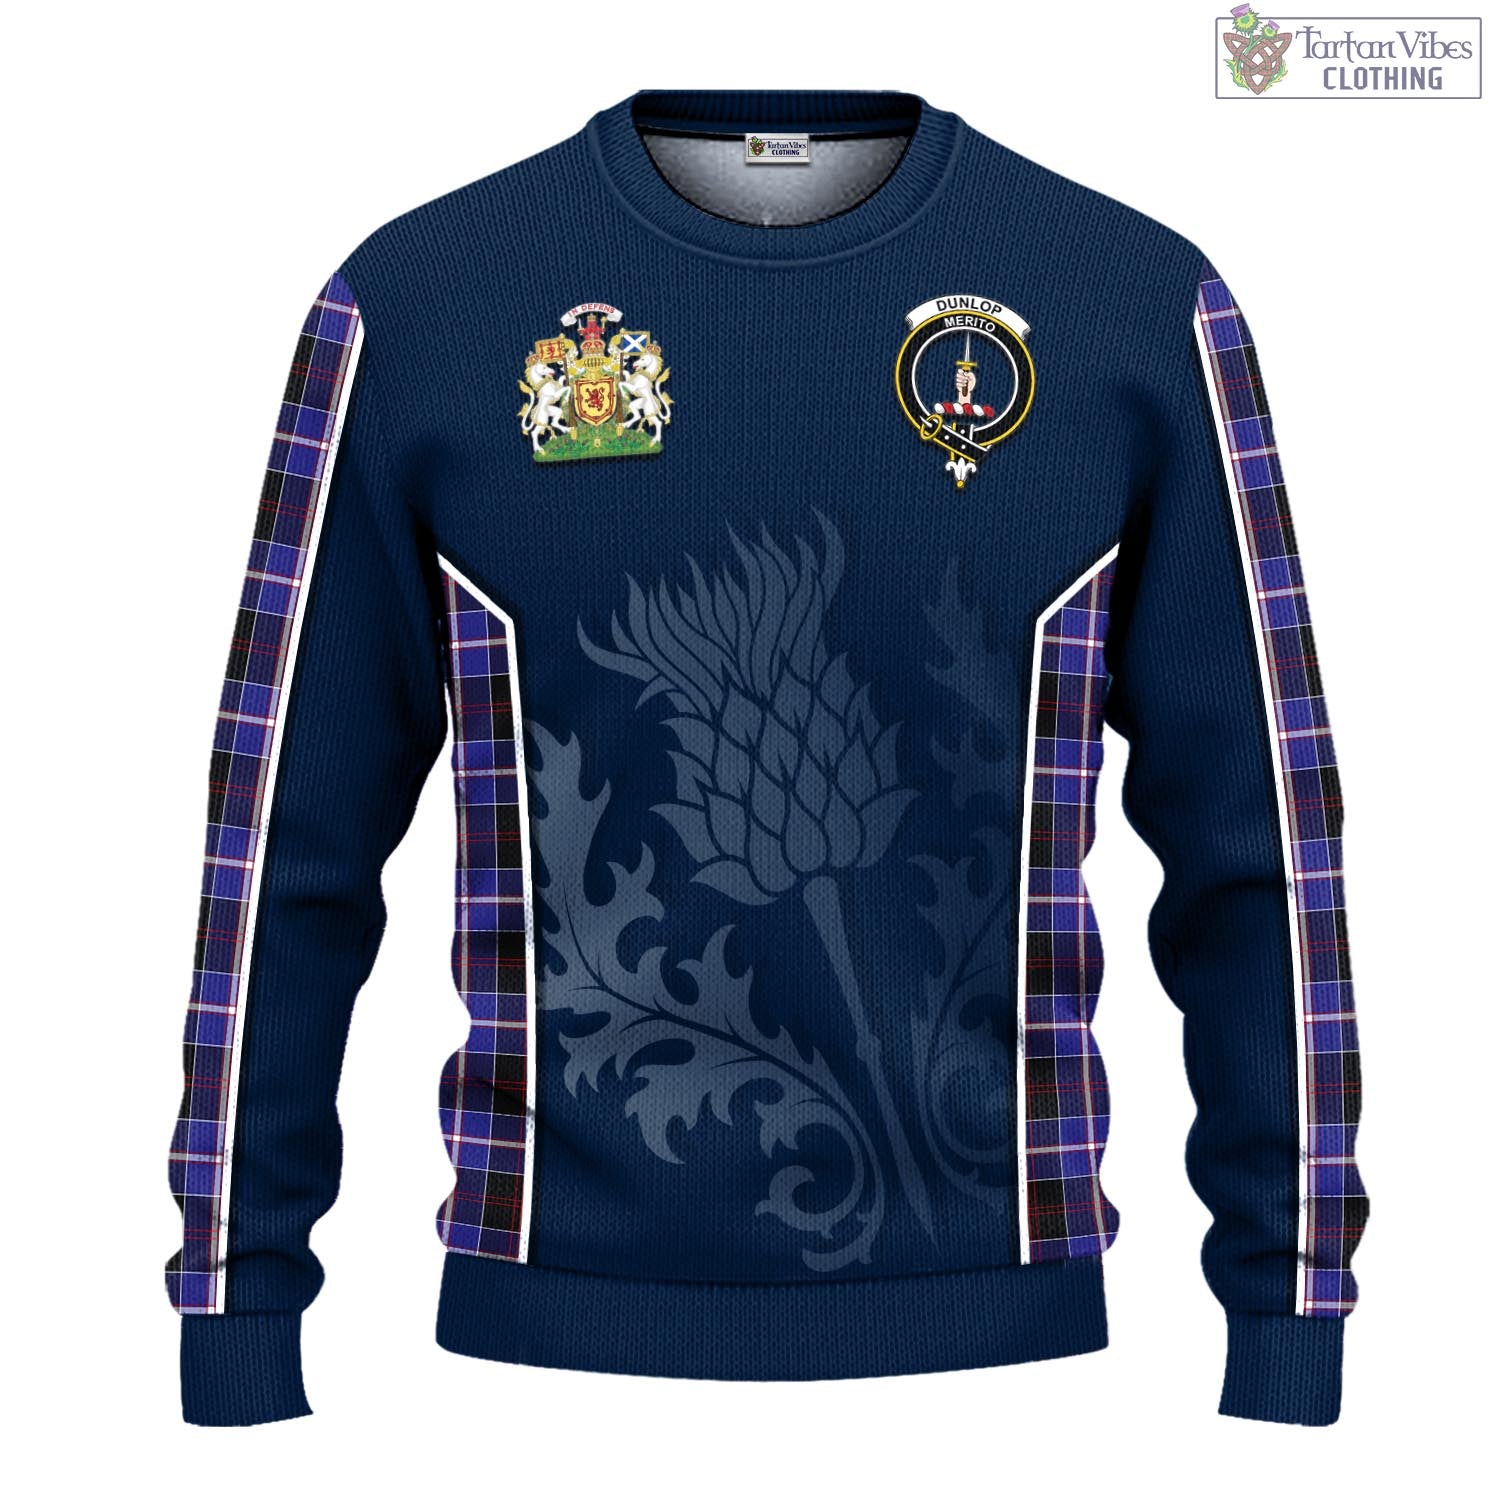 Tartan Vibes Clothing Dunlop Modern Tartan Knitted Sweatshirt with Family Crest and Scottish Thistle Vibes Sport Style